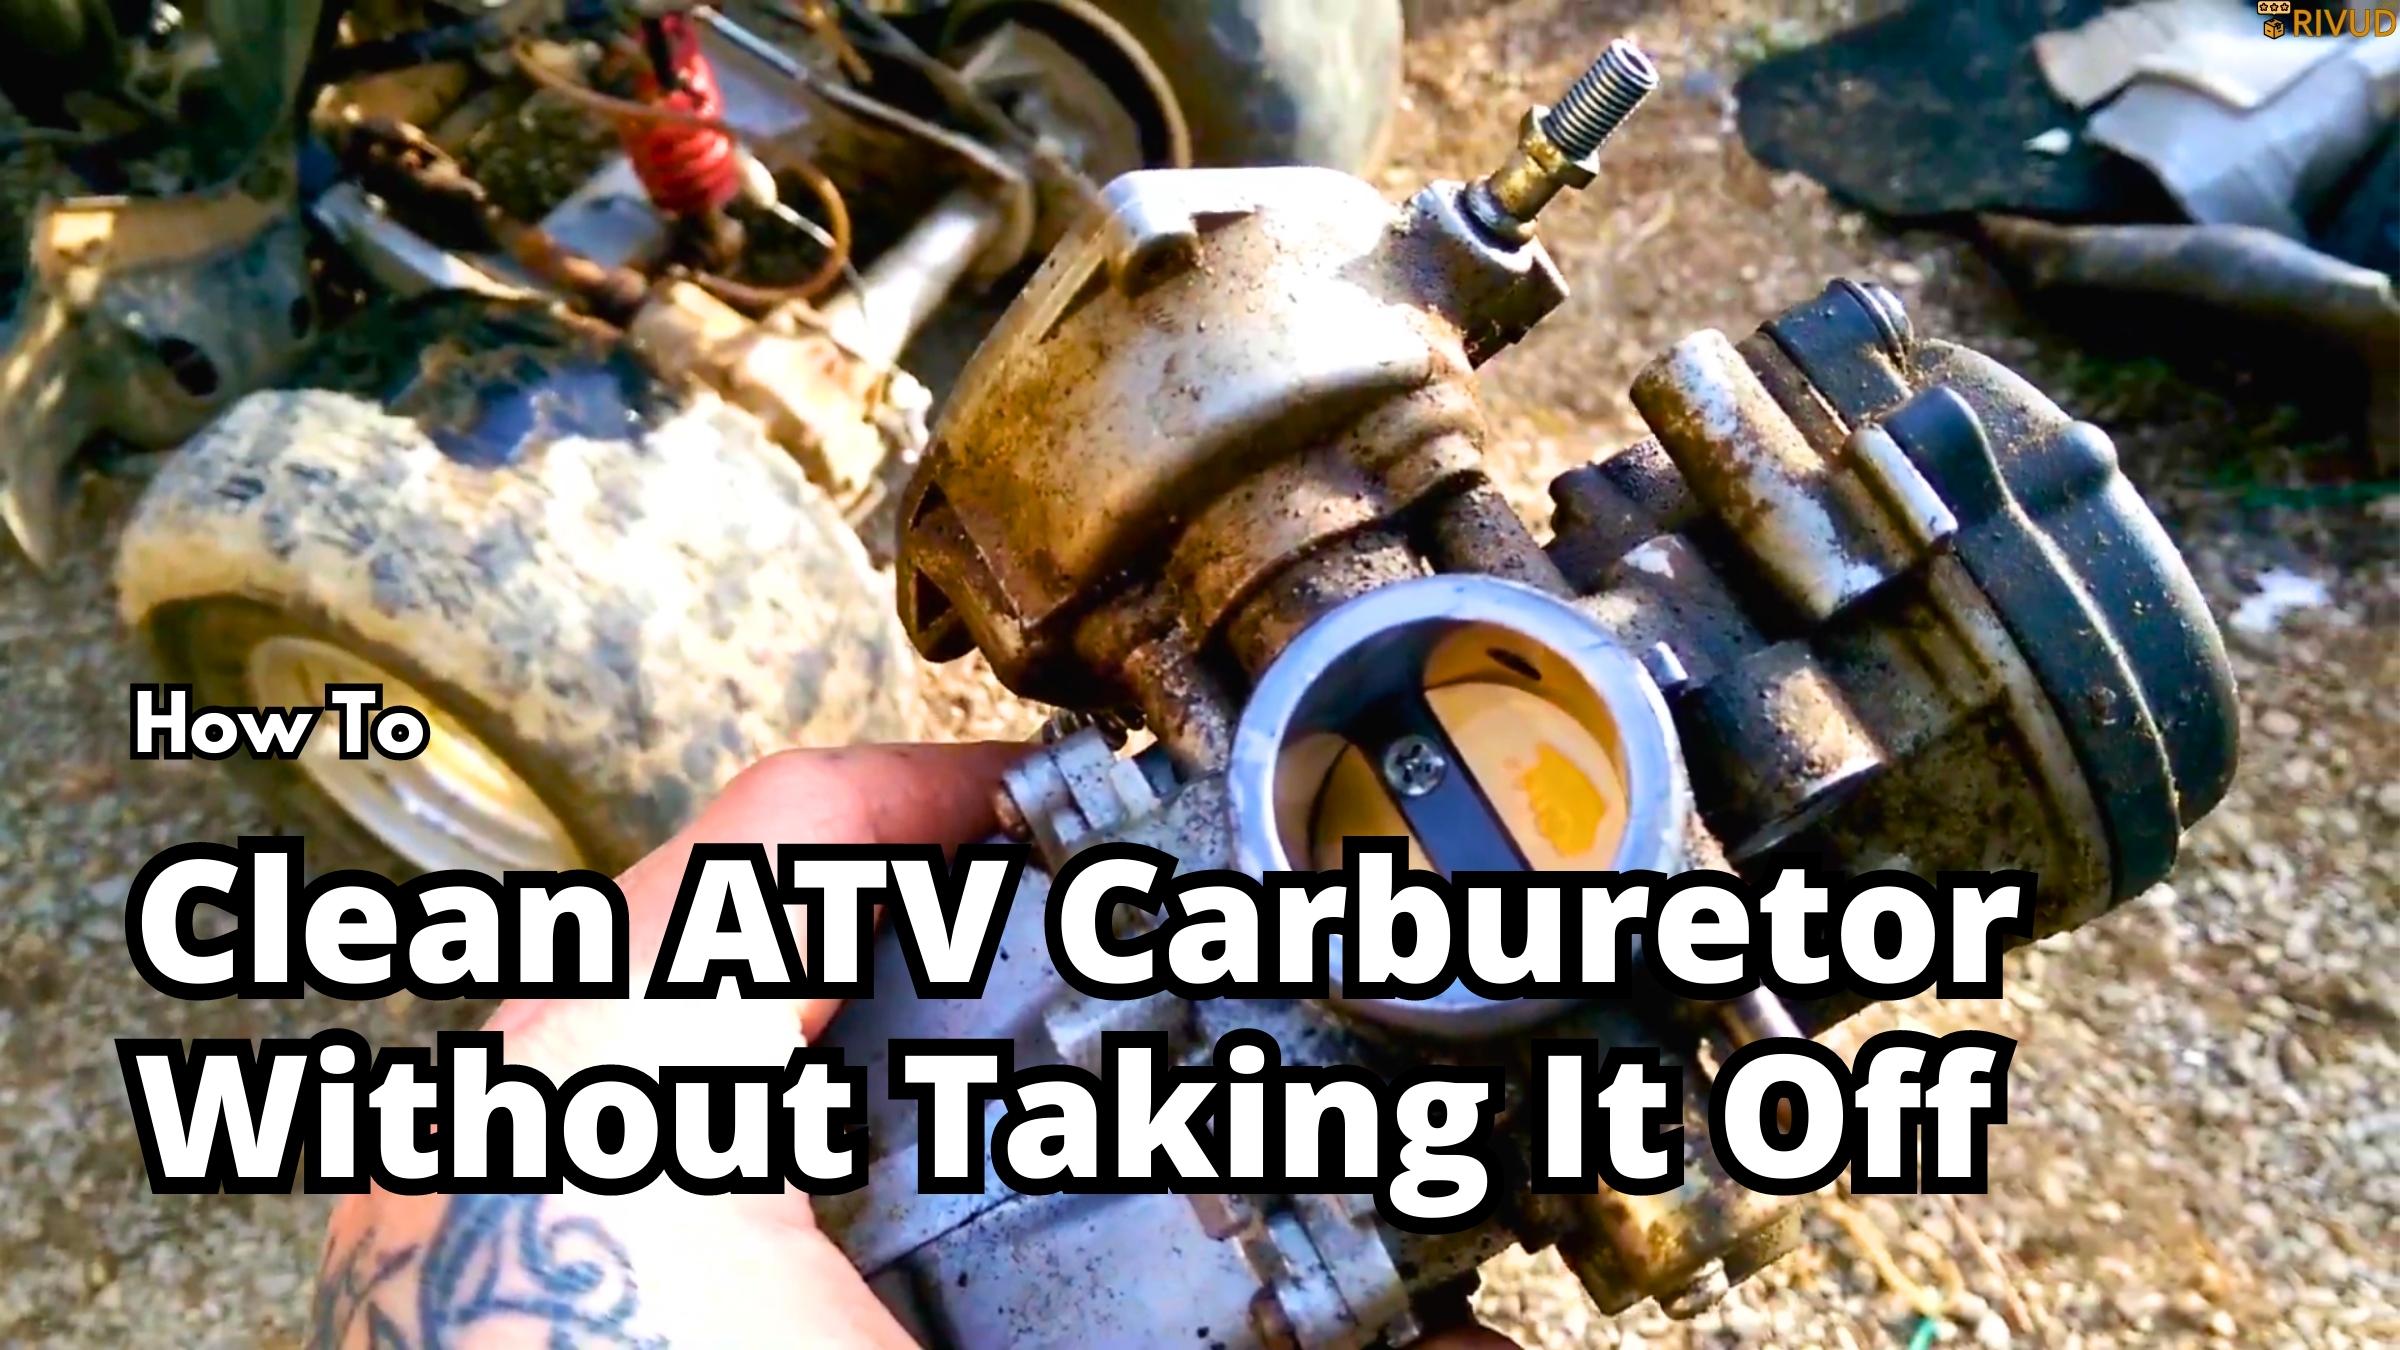 How To Clean Atv Carburetor Without Taking It Off?